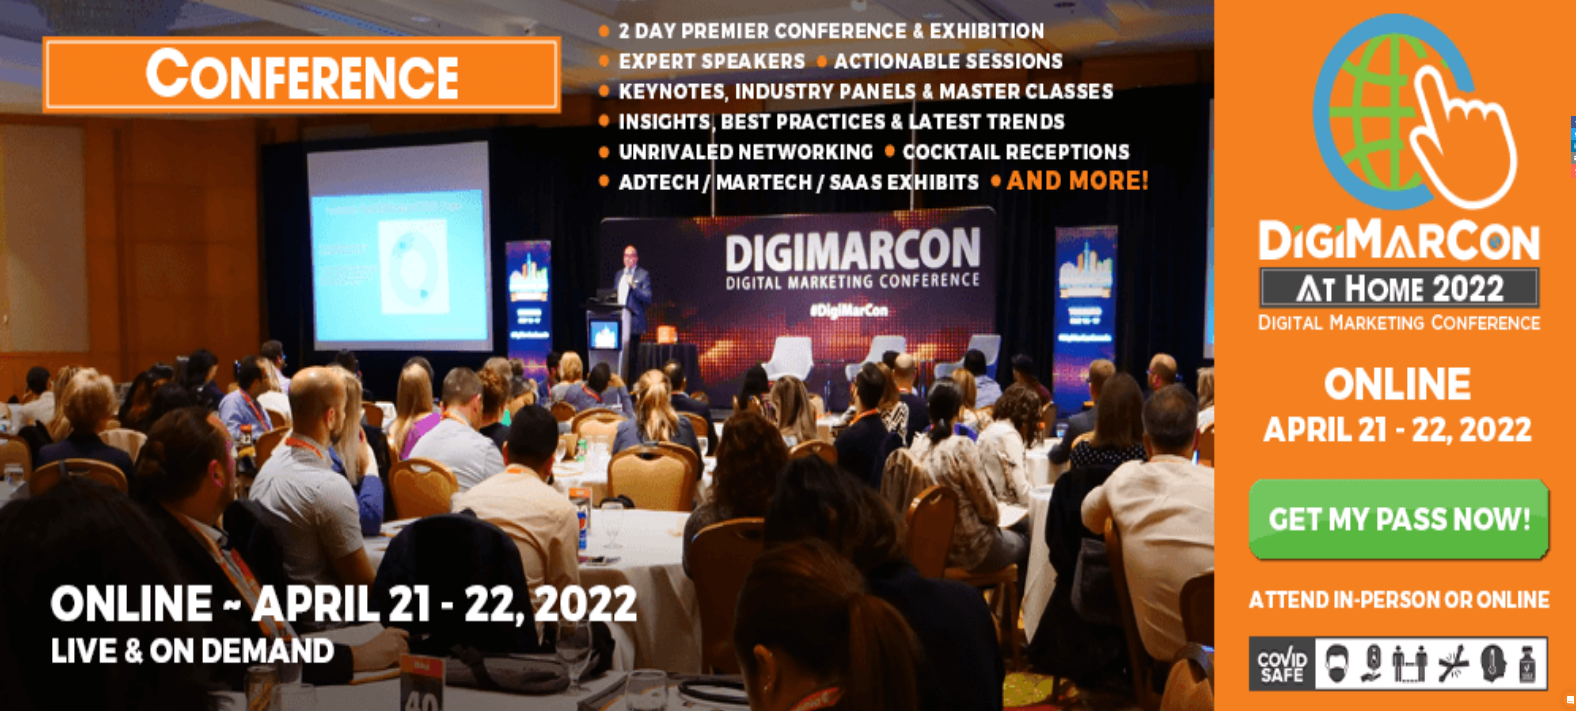 DigiMarCon At Home 2022